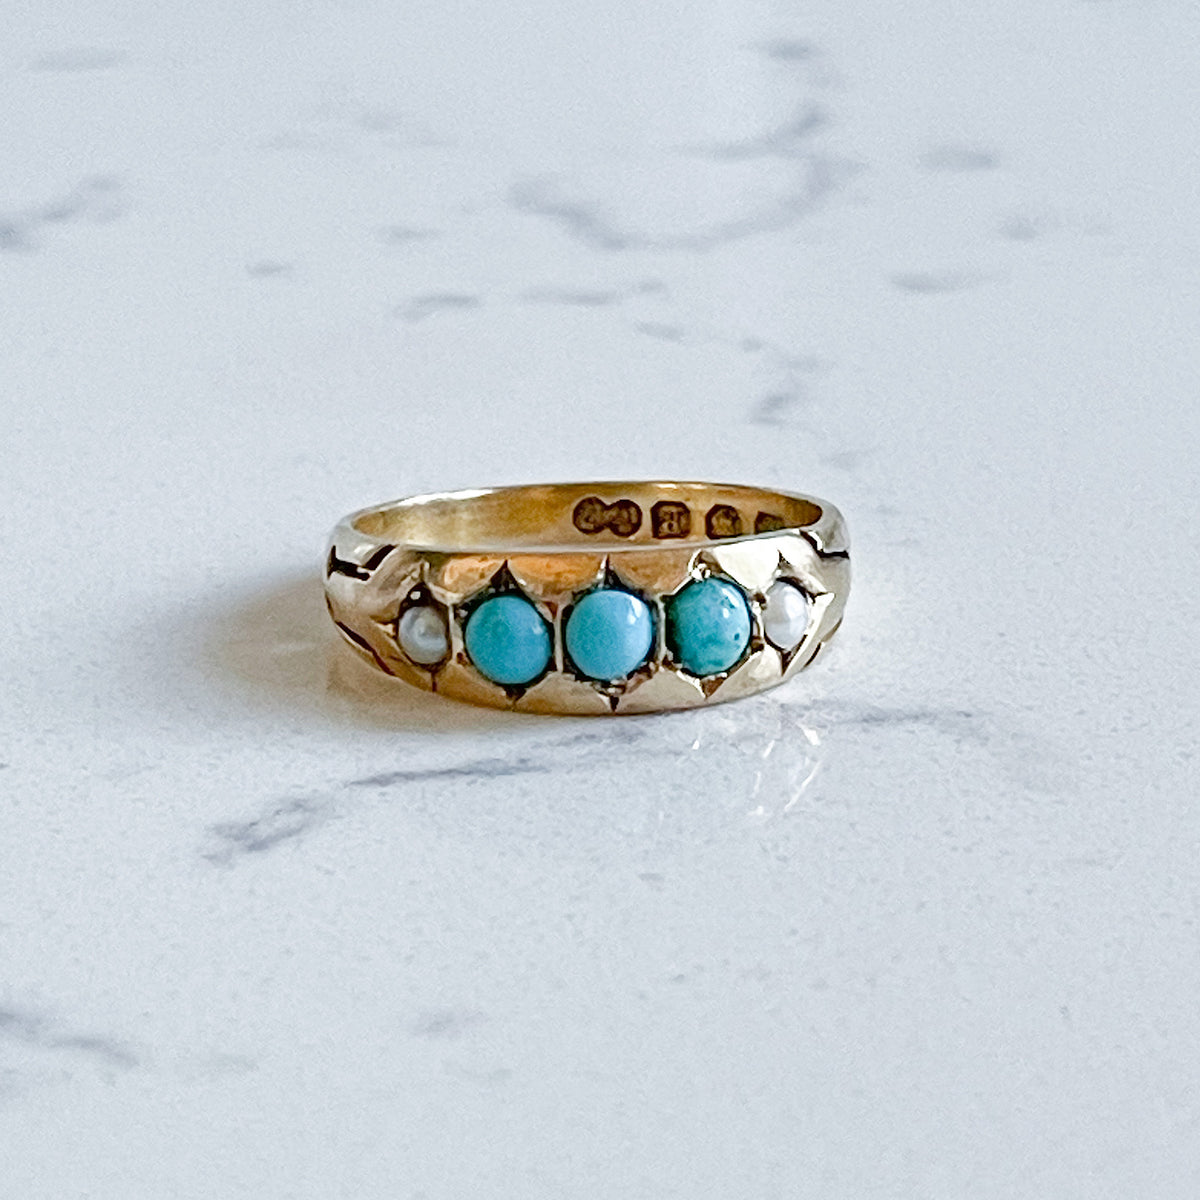 Antique 18K Gold Ring with Turquoise and Pearl, 1890